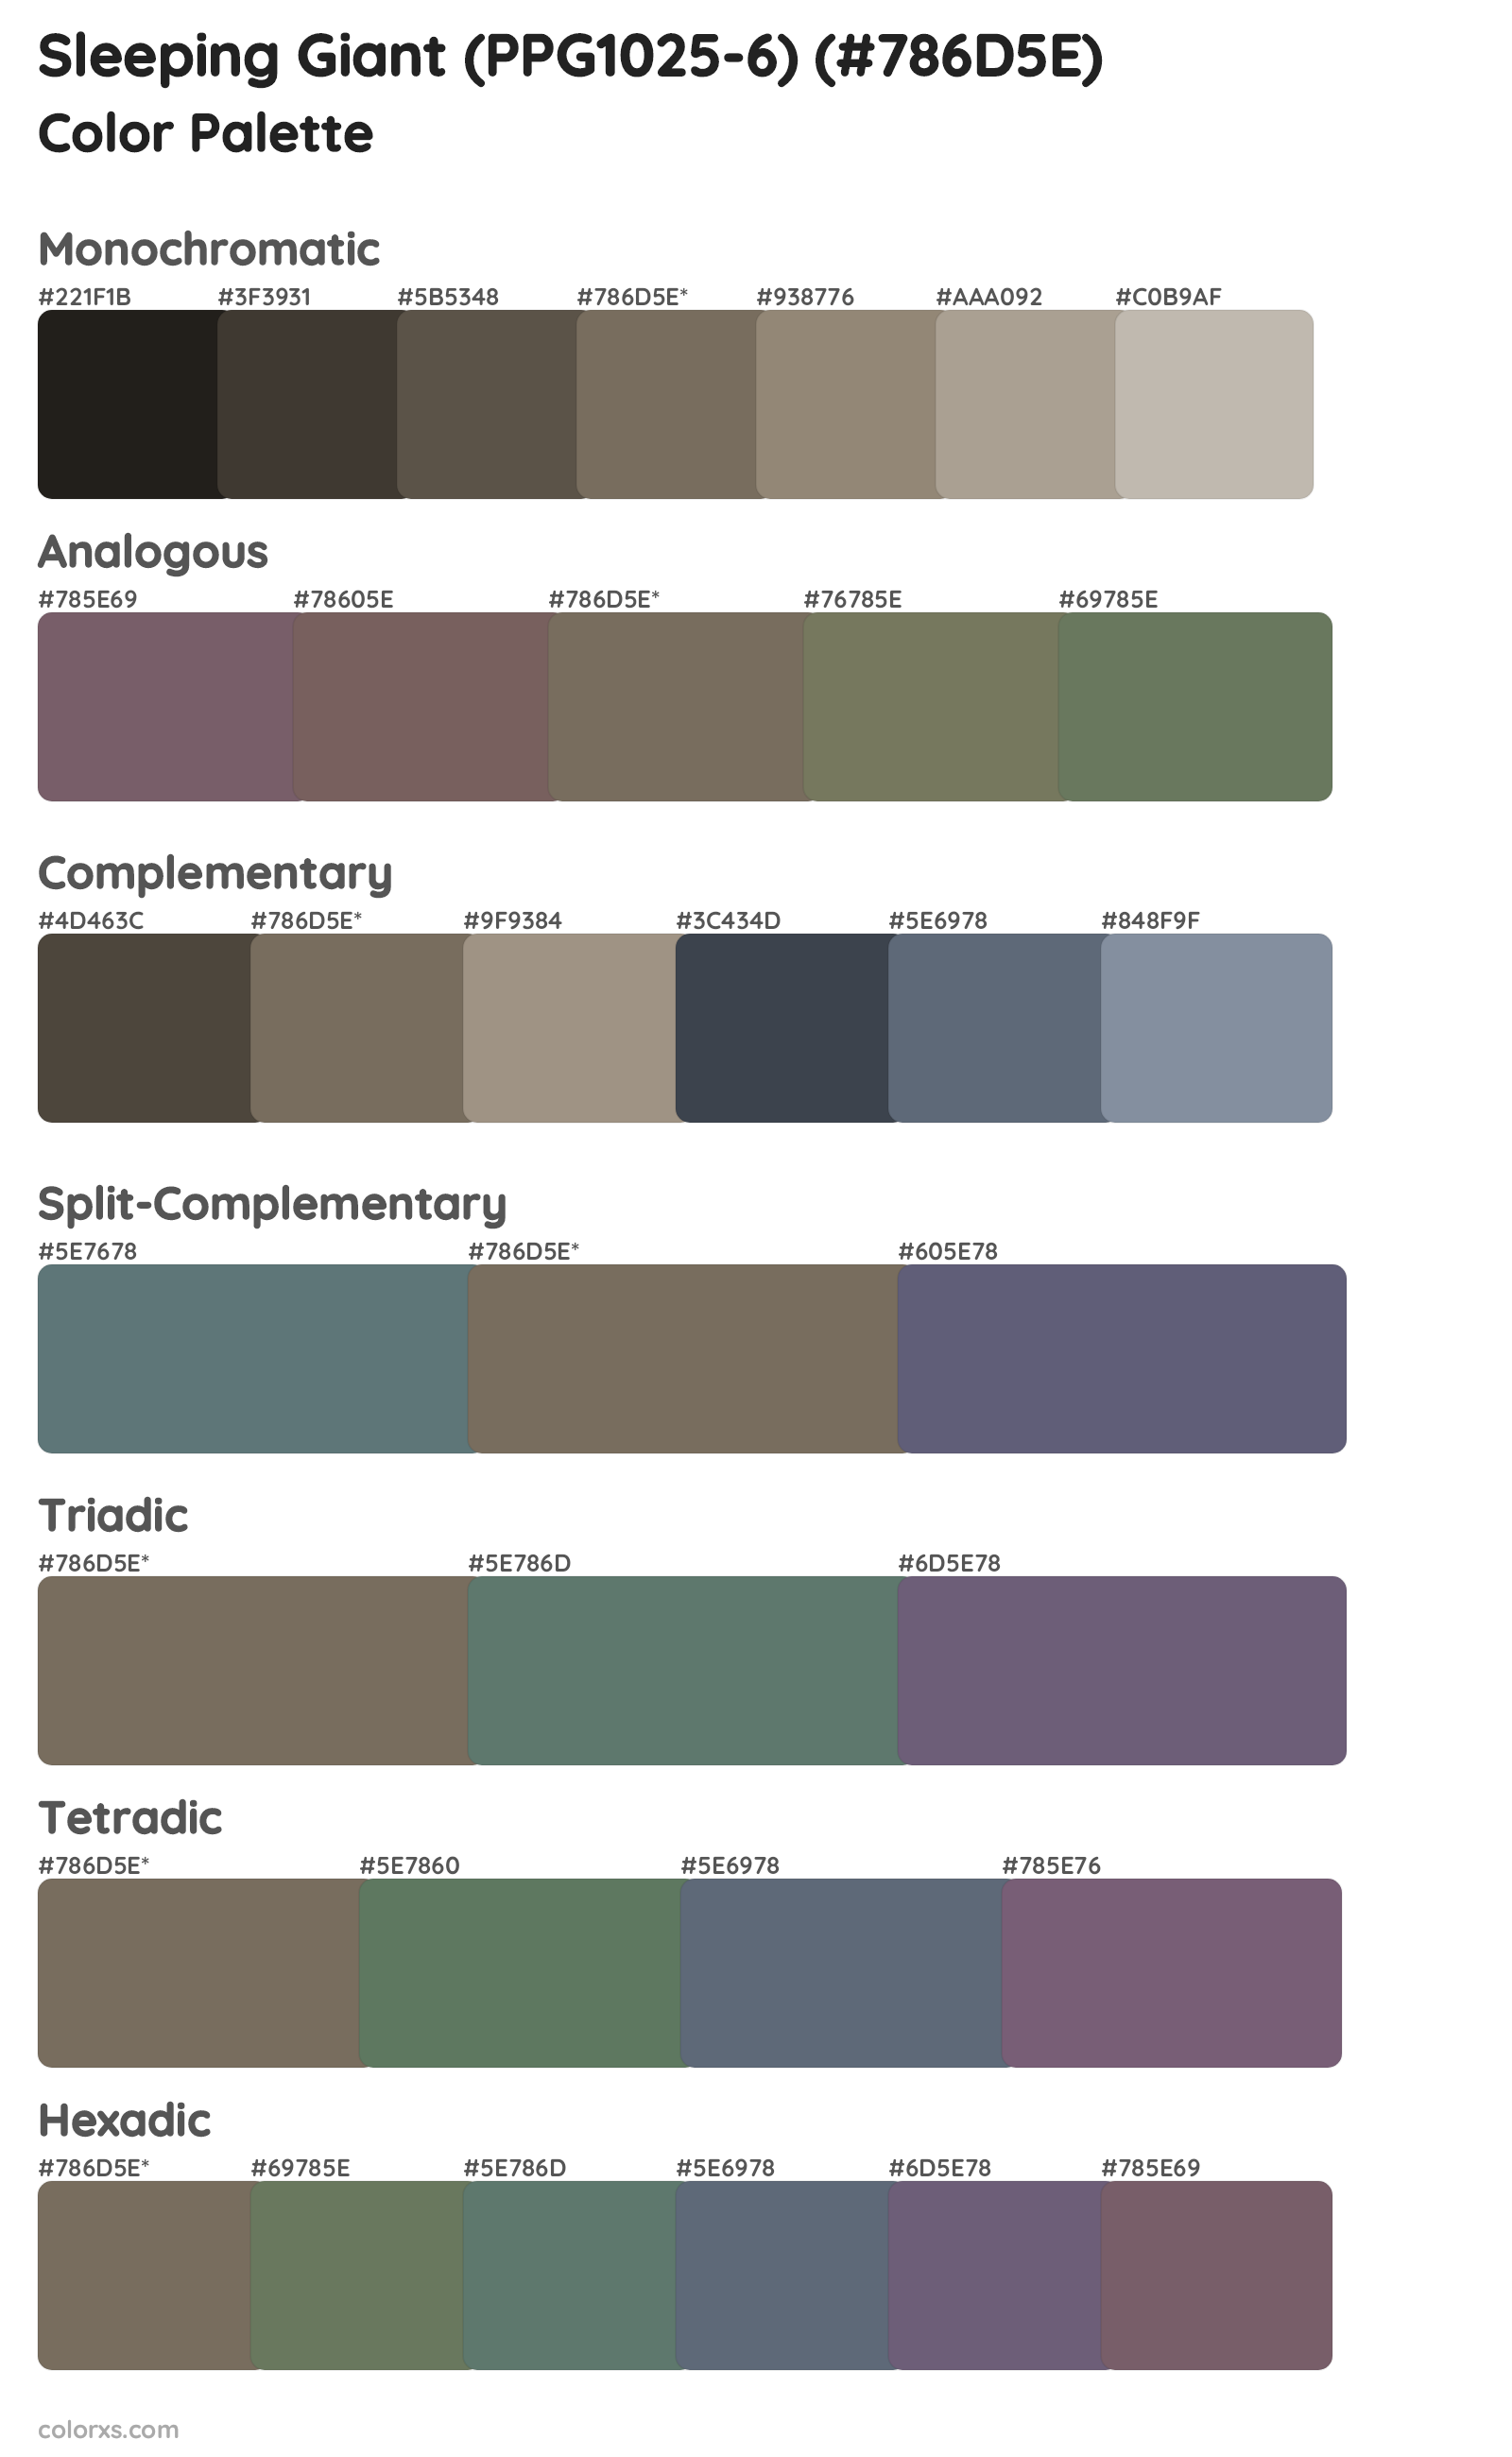 Sleeping Giant (PPG1025-6) Color Scheme Palettes